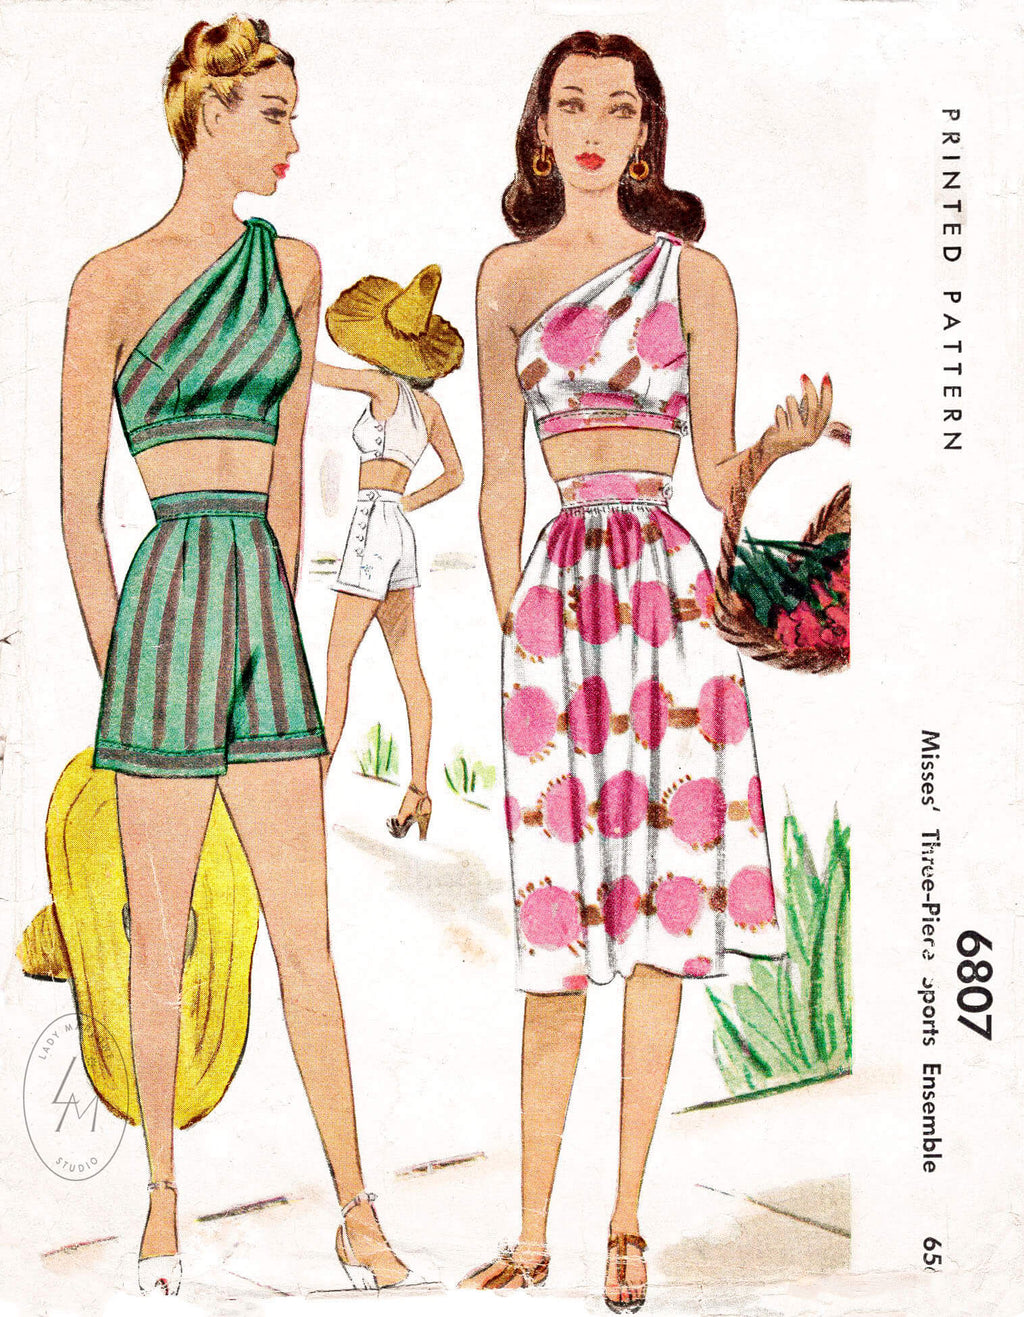 McCall 6807 vintage sewing pattern reproduction 1940s 1947 one shoulder crop top sun skirt high waisted shorts